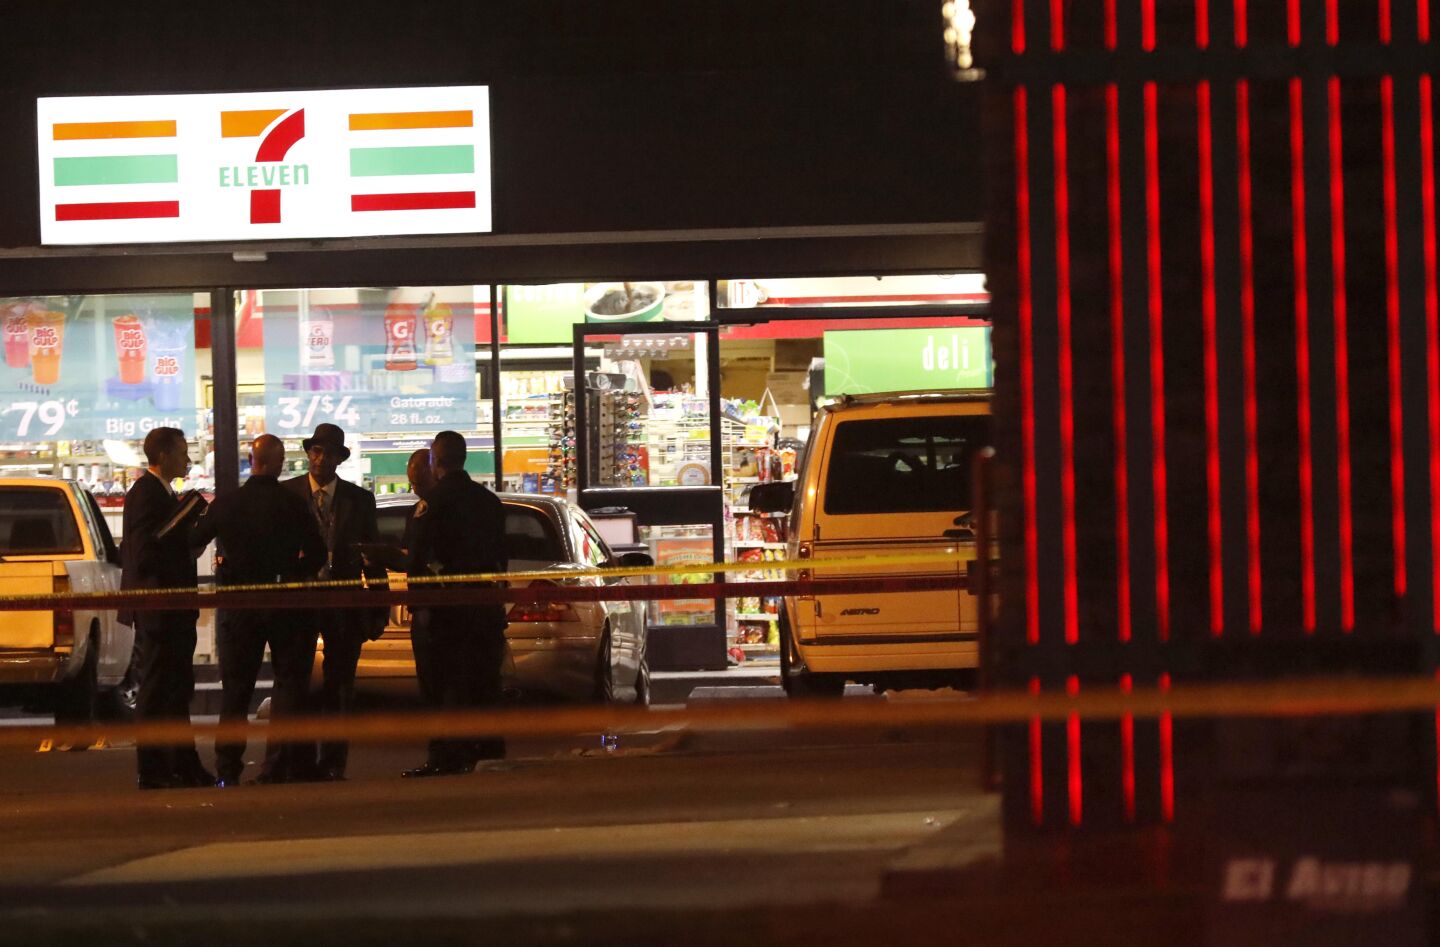 Police were still at work Wednesday night, hours after the stabbing rampage ended outside a 7-Eleven store in Santa Ana.